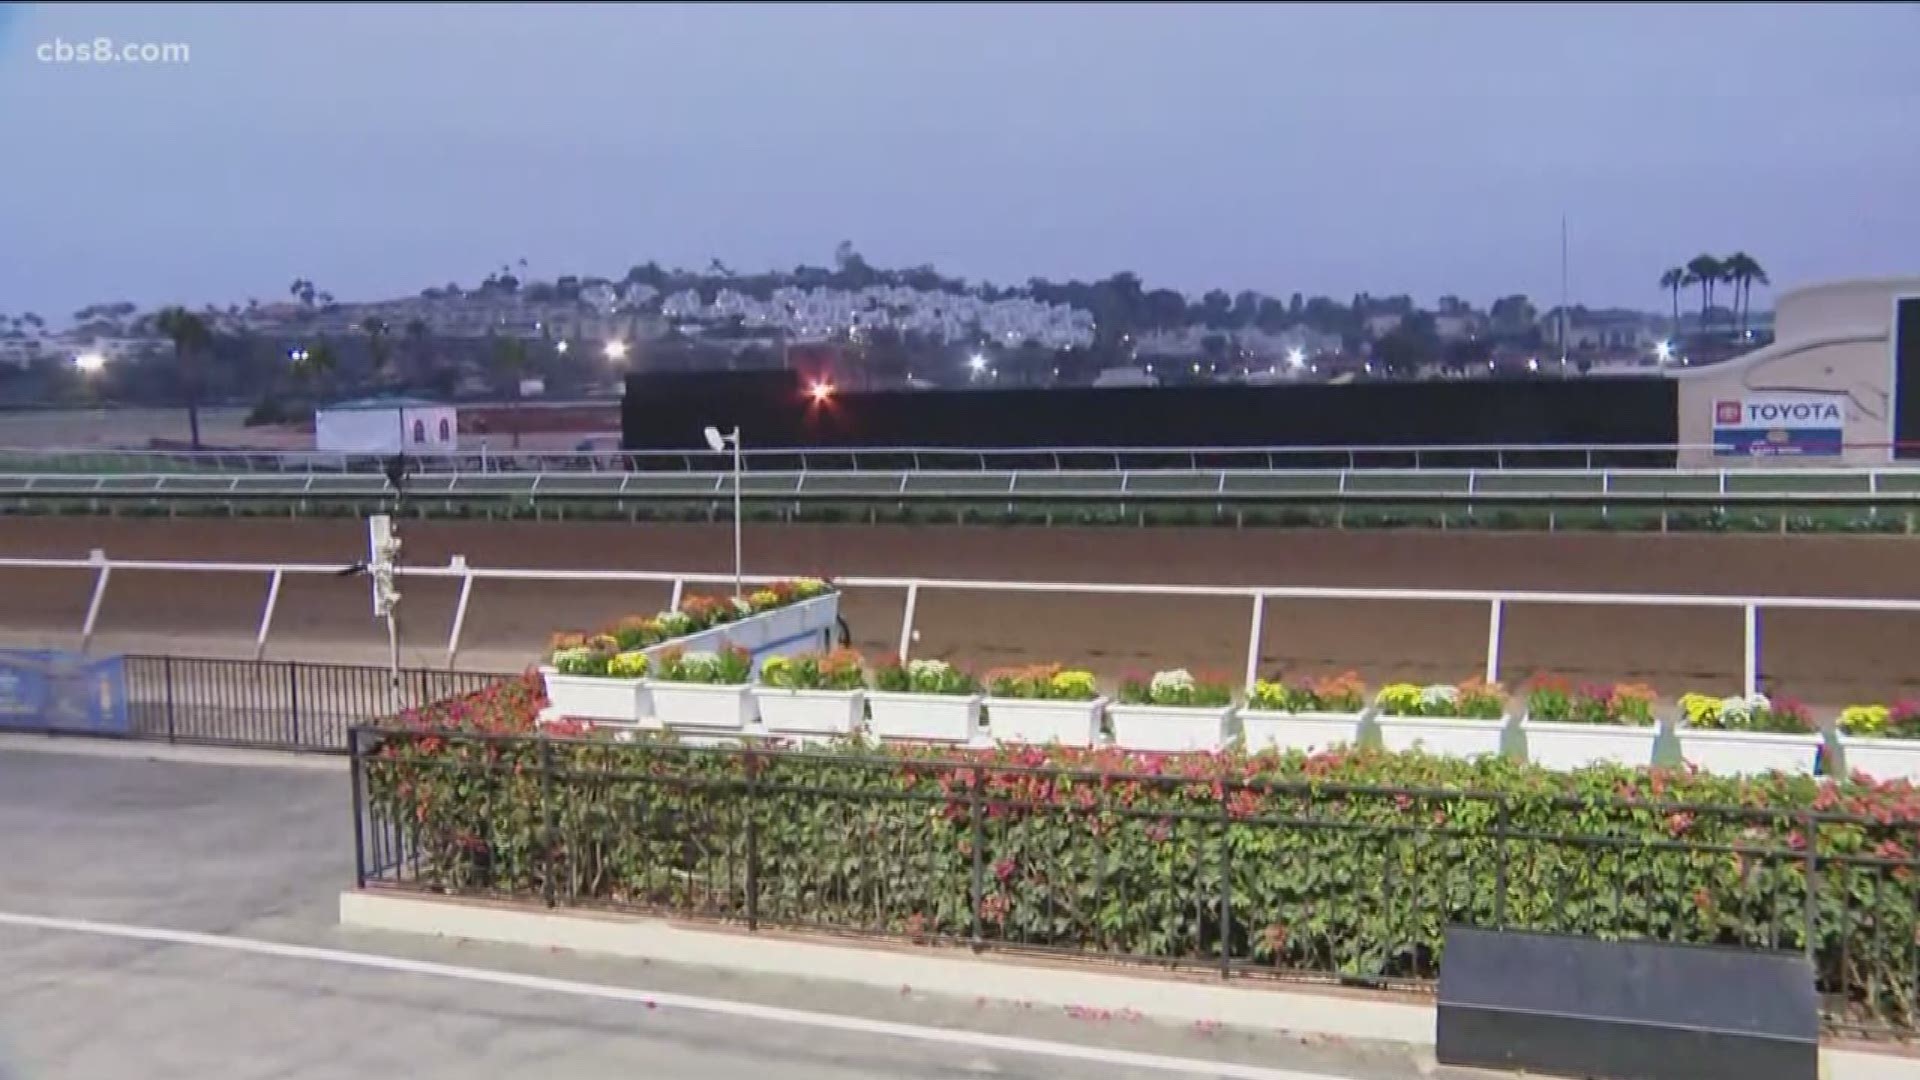 Heading to Del Mar for Opening Day? Ashley talks to experts about what to expect.